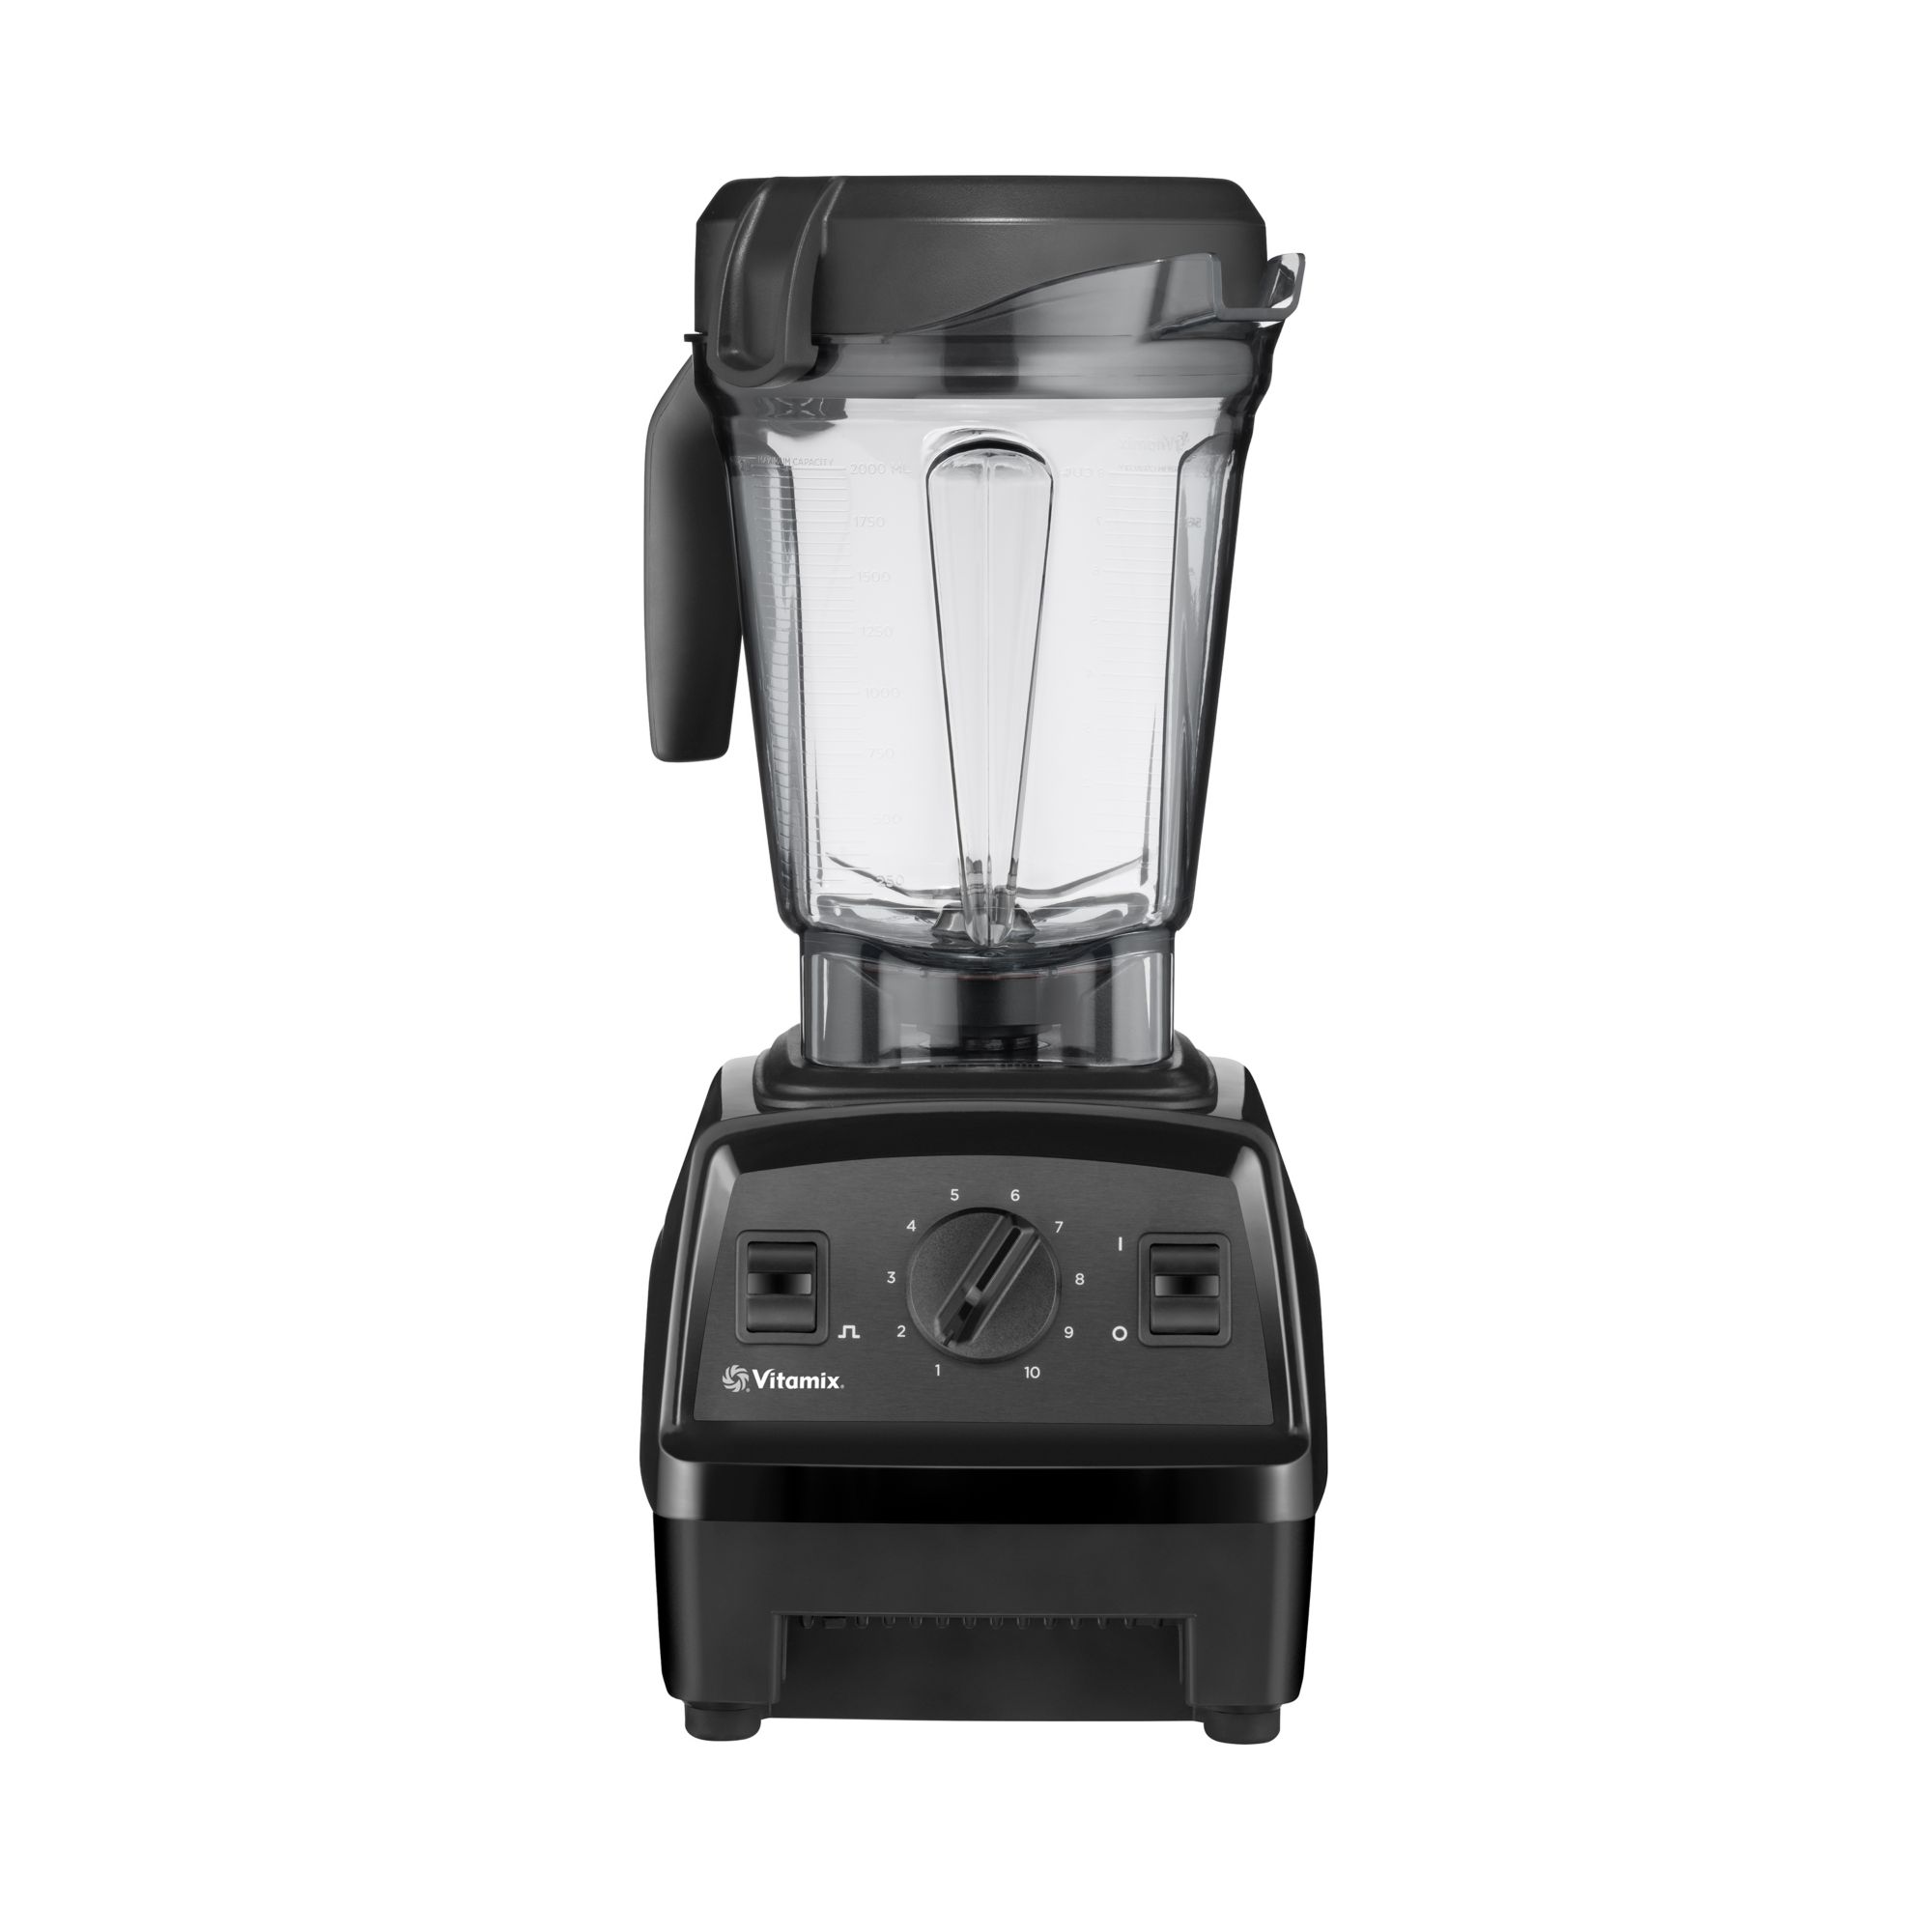 Beast Blender Review: Is It Worth It?